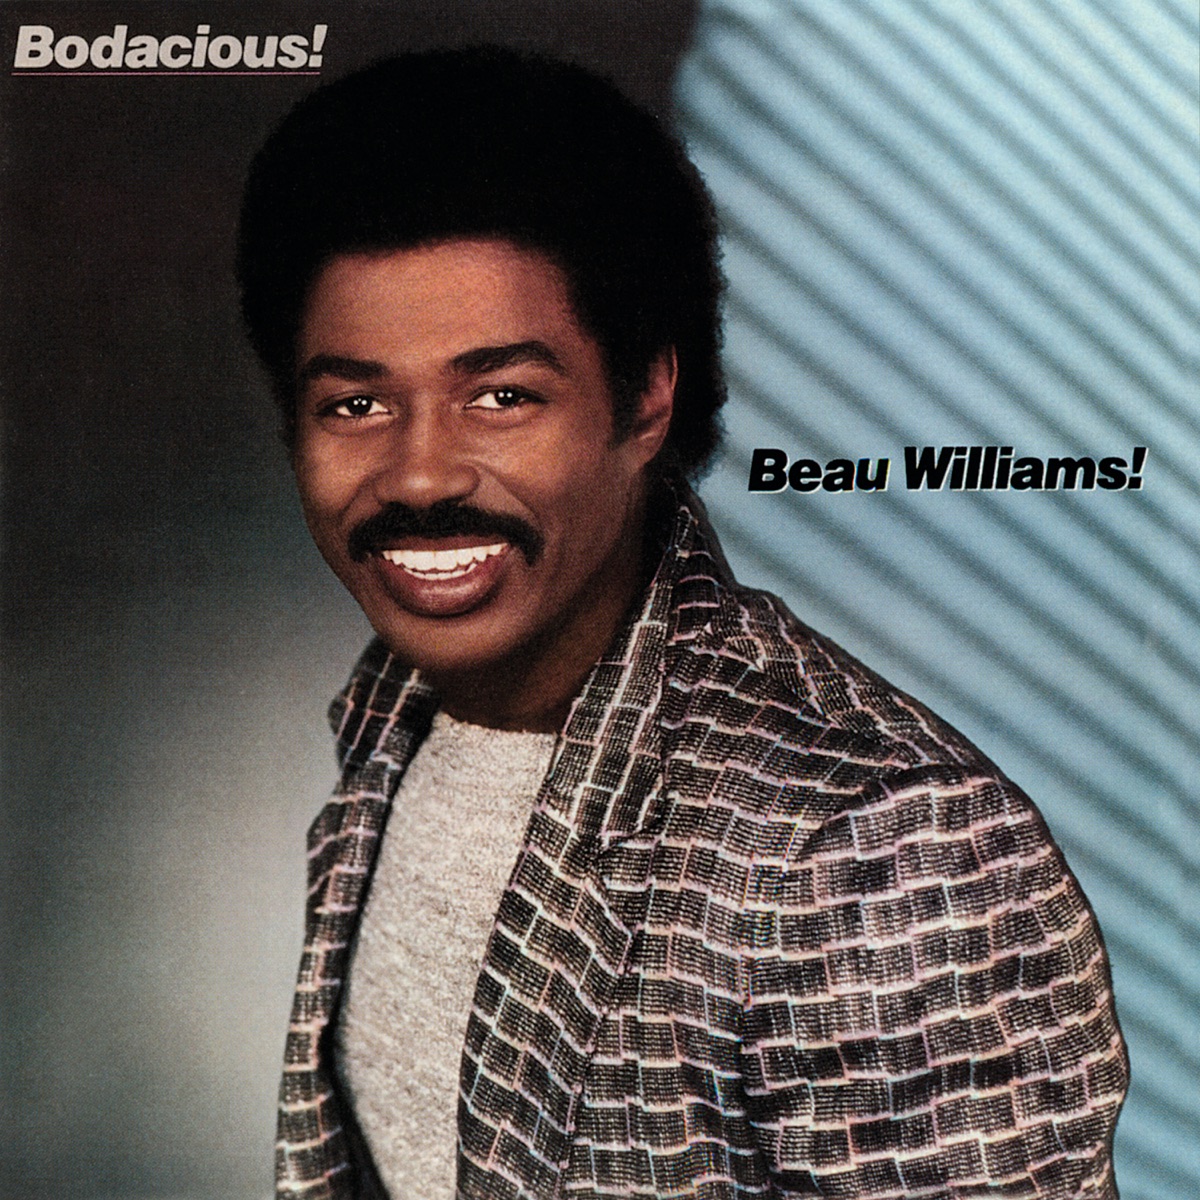 The Very Best of Beau Williams - Album by Beau Williams - Apple Music